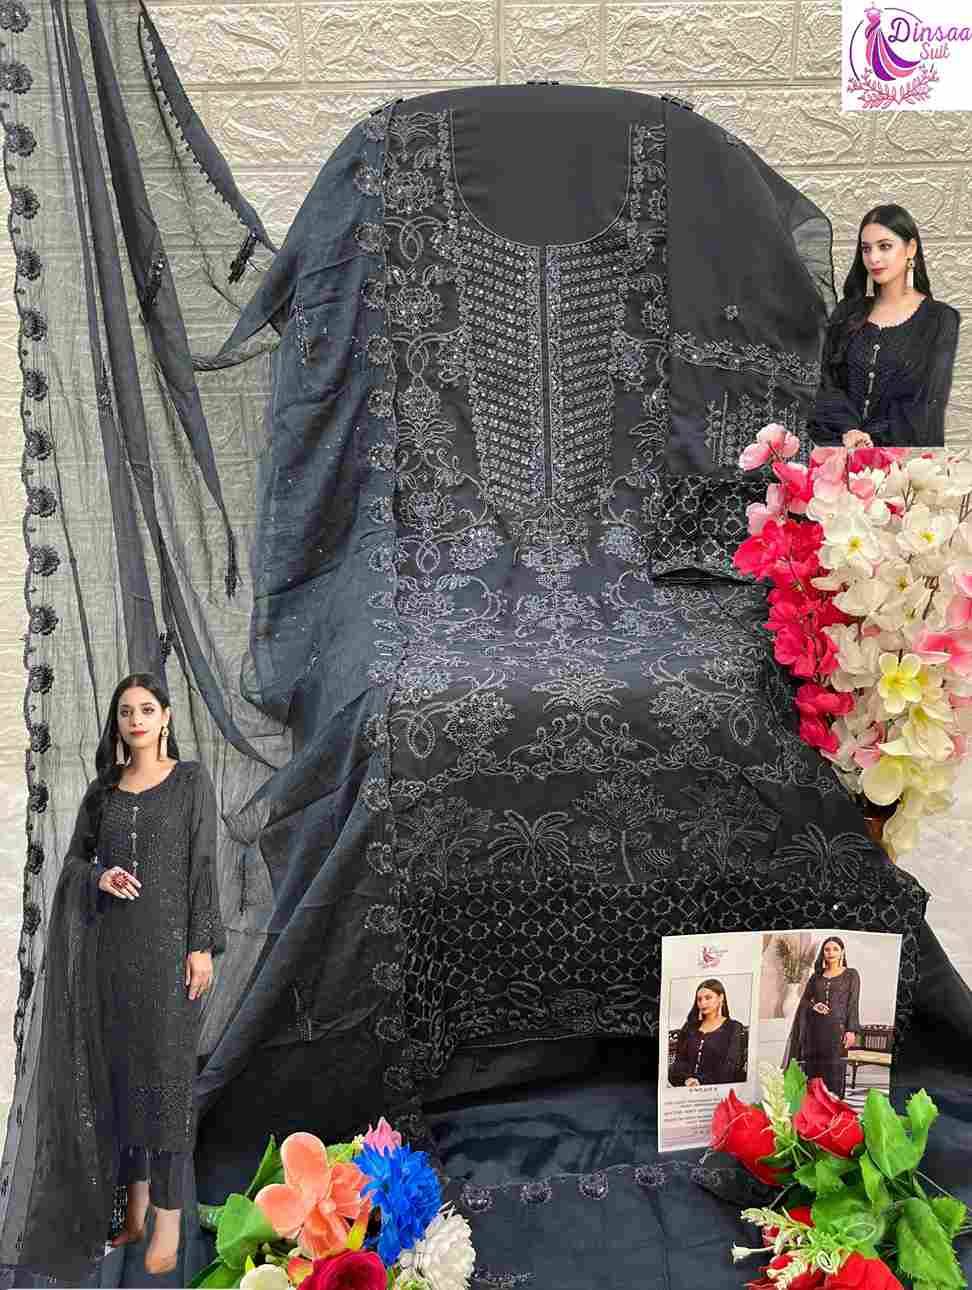 Dinsaa Hit Design 235 Colours By Dinsaa Suits 235-A To 235-D Series Designer Pakistani Suits Beautiful Stylish Fancy Colorful Party Wear & Occasional Wear Heavy Faux Georgette Dresses At Wholesale Price